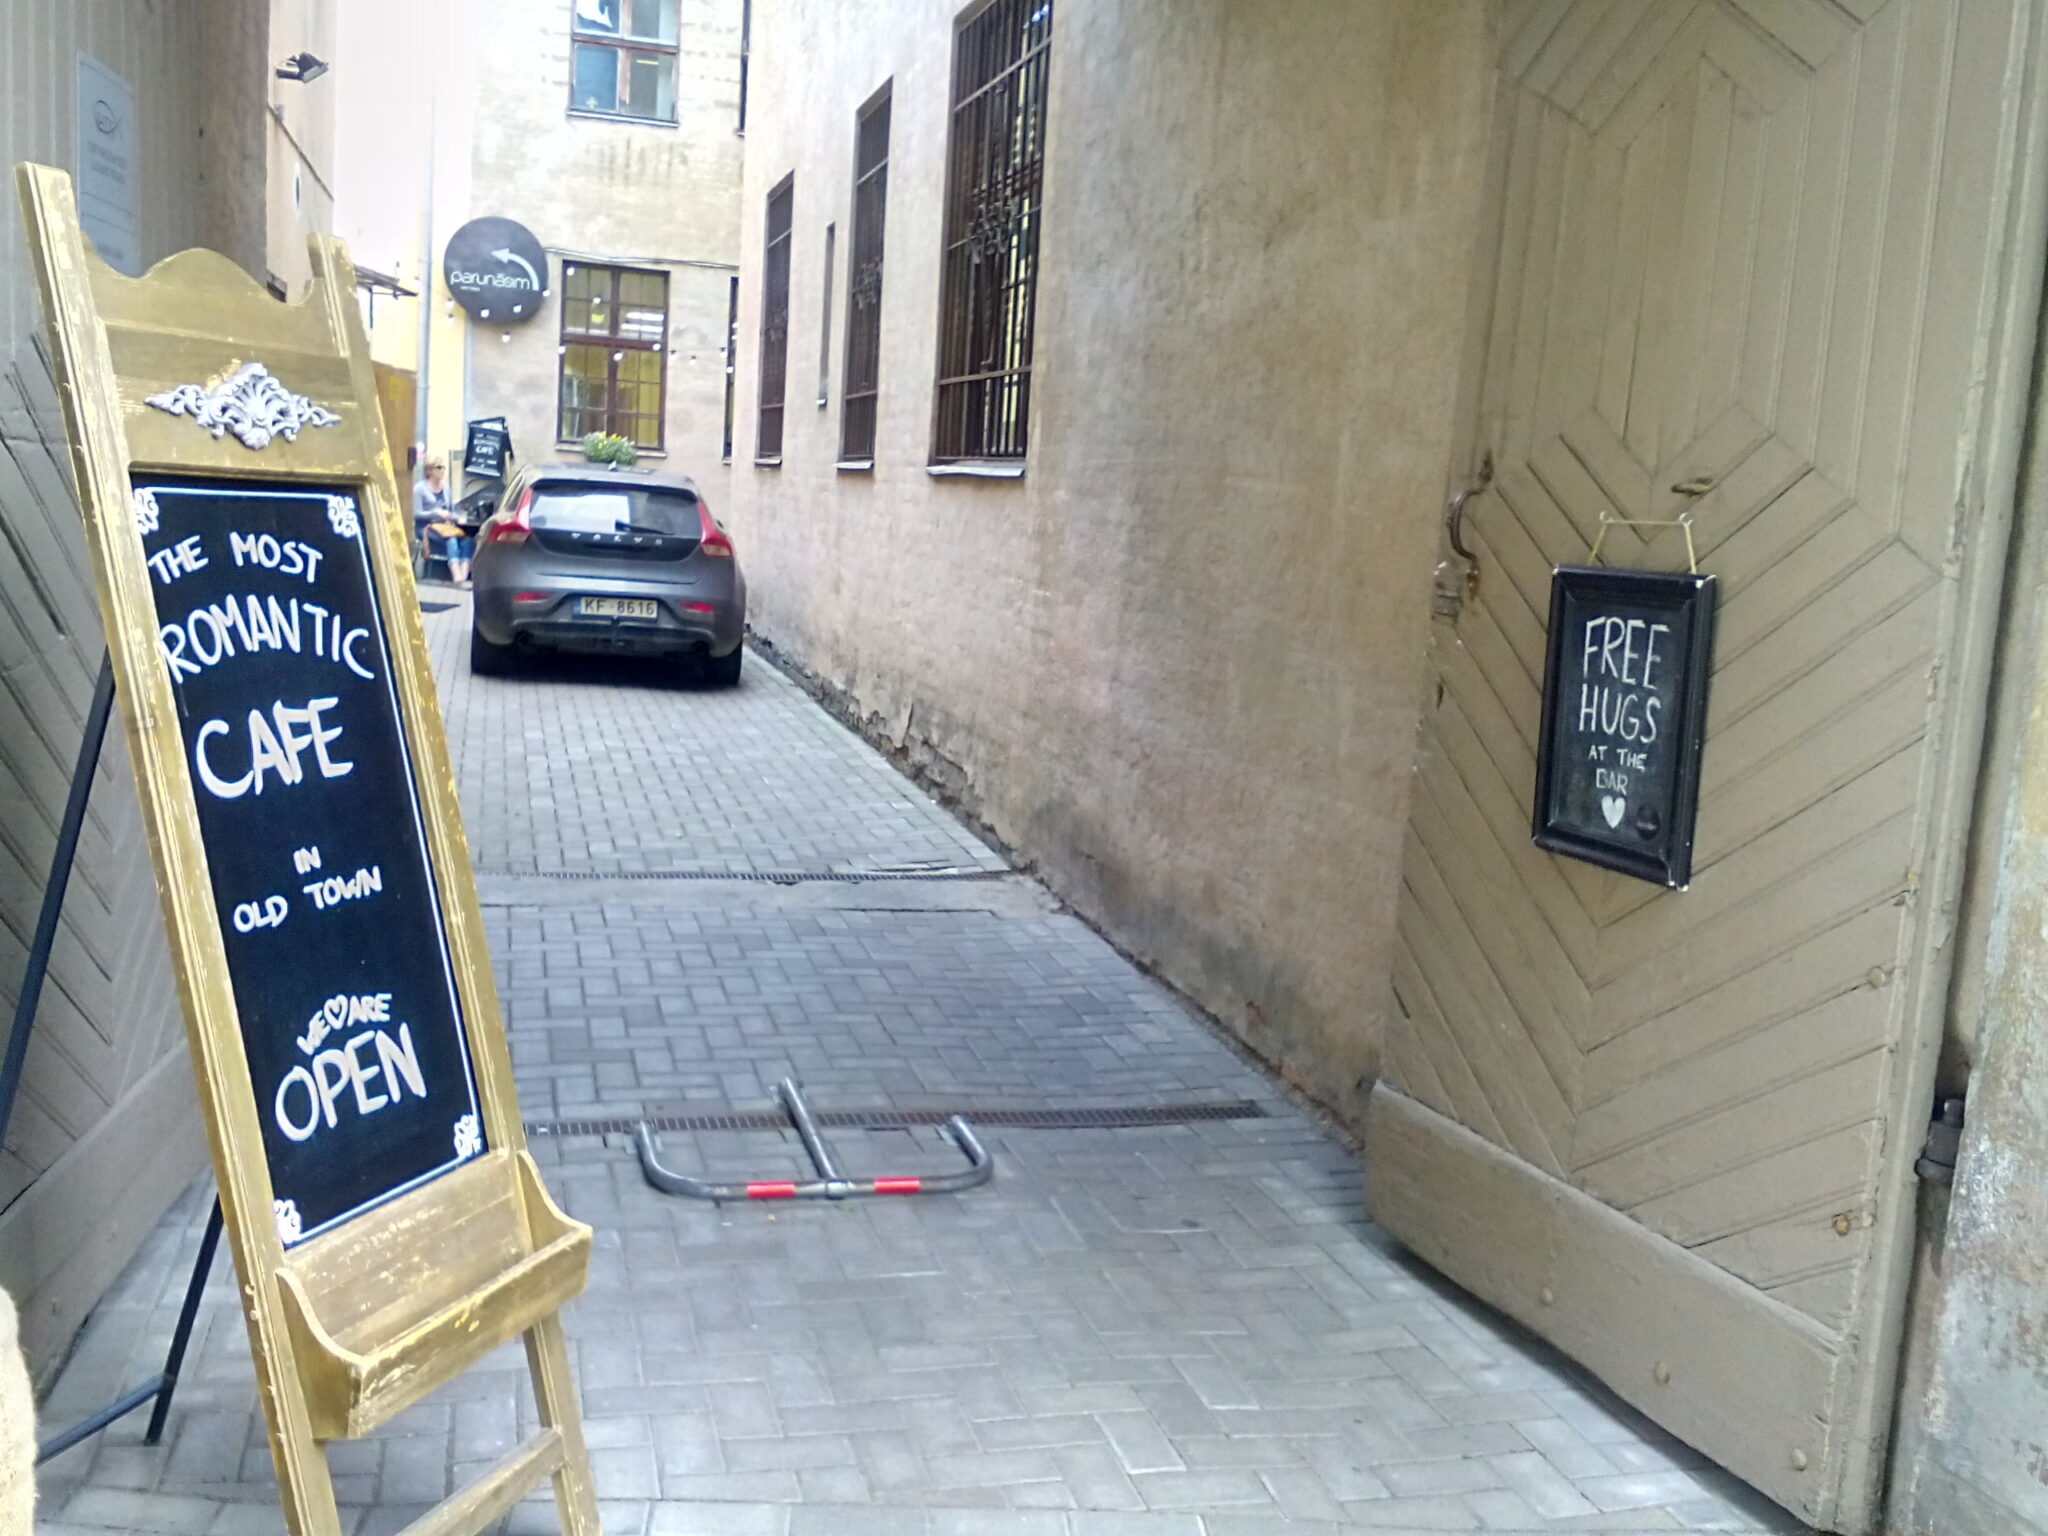 An alley in Riga, Latvia in the middle of the Old Town showing a sign indicating the most romantic cafe with free hugs.